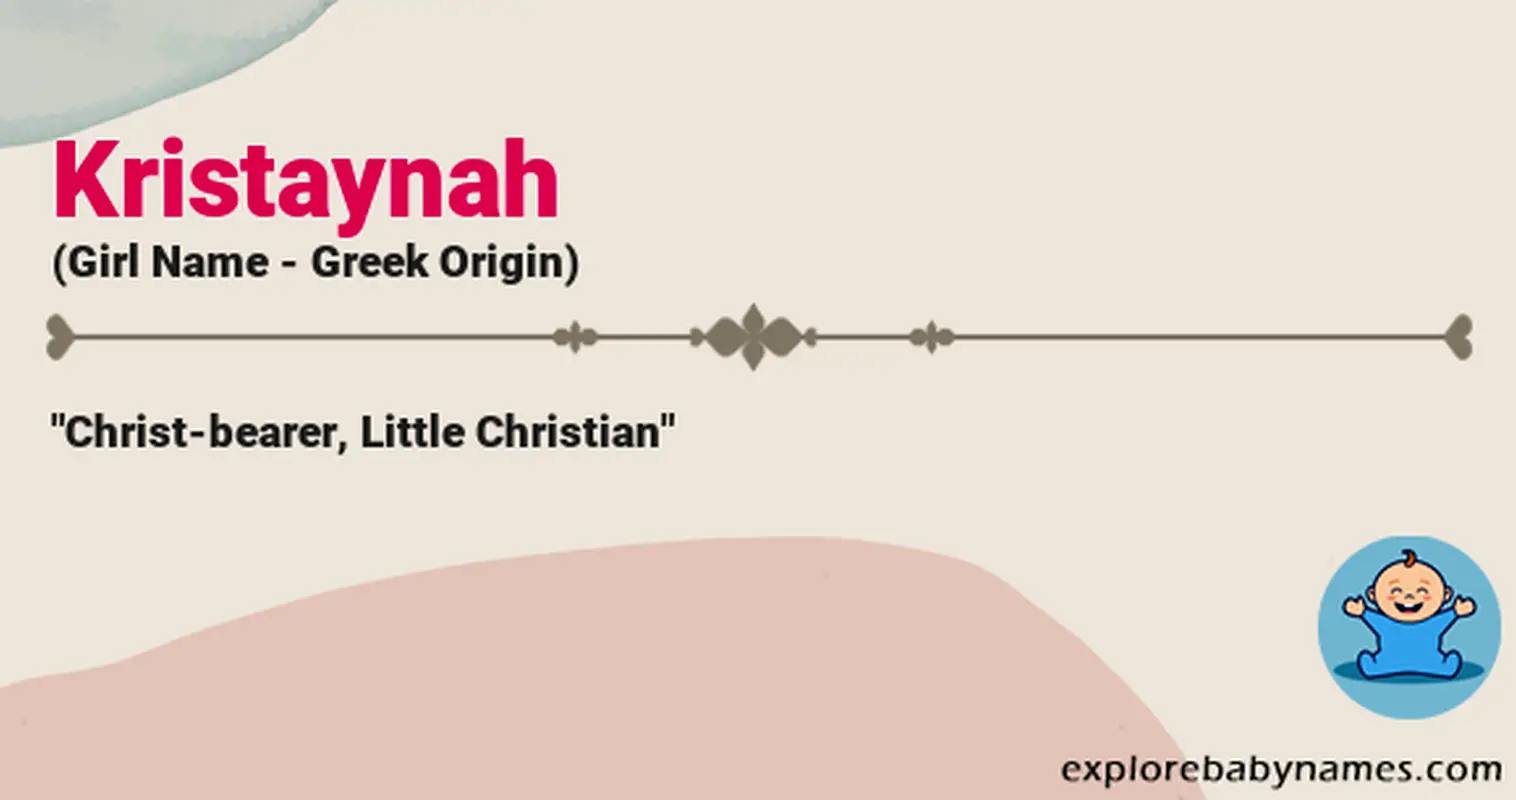 Meaning of Kristaynah